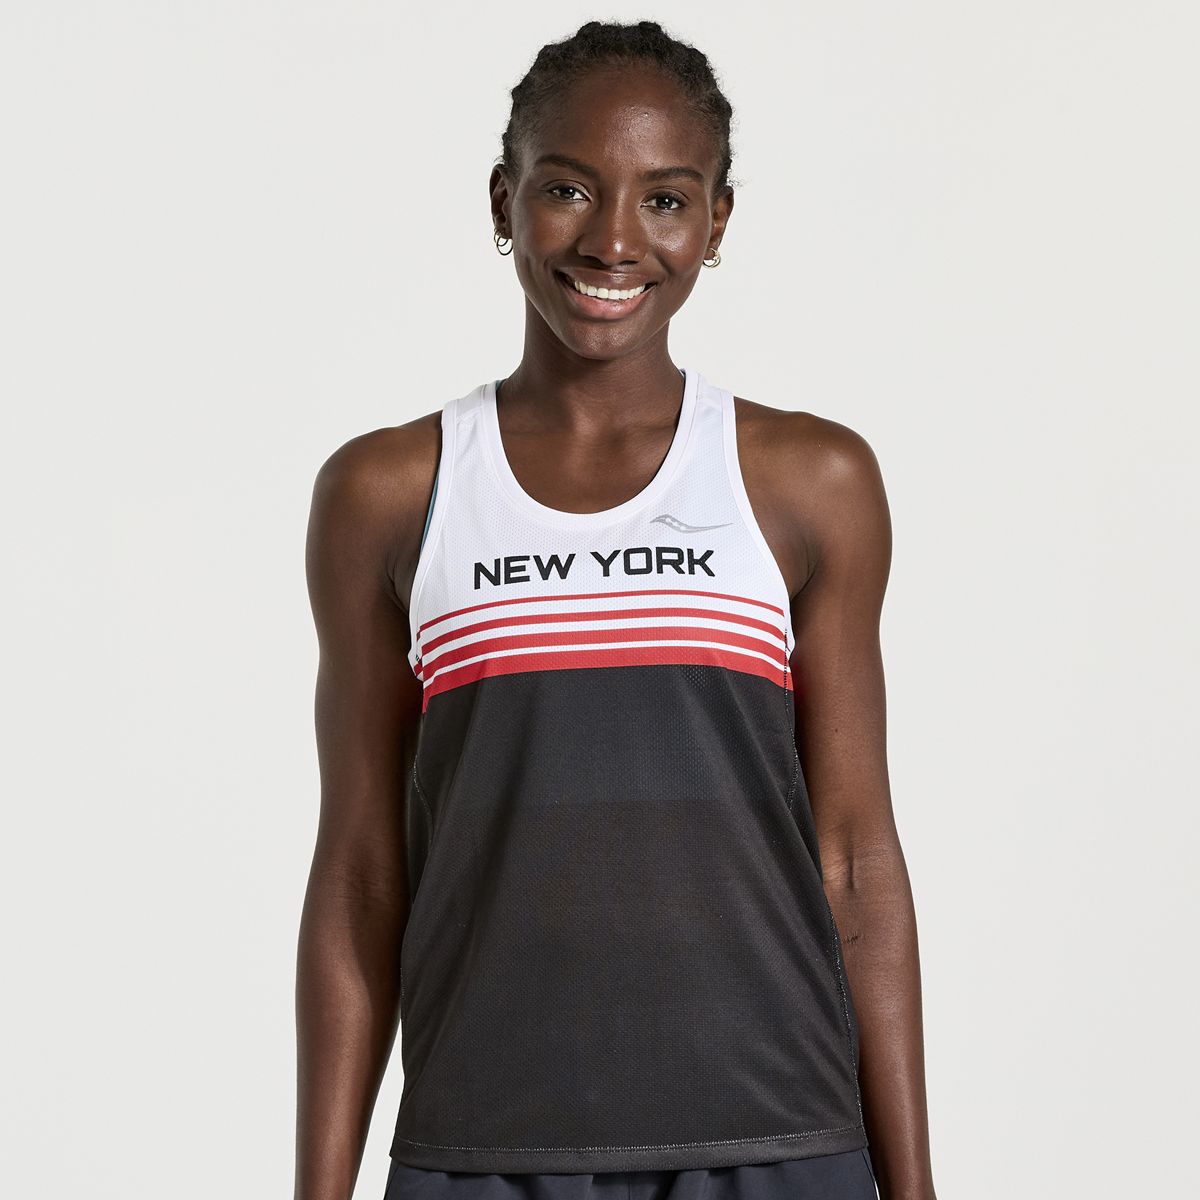 Women's NYC Stopwatch Singlet - View All